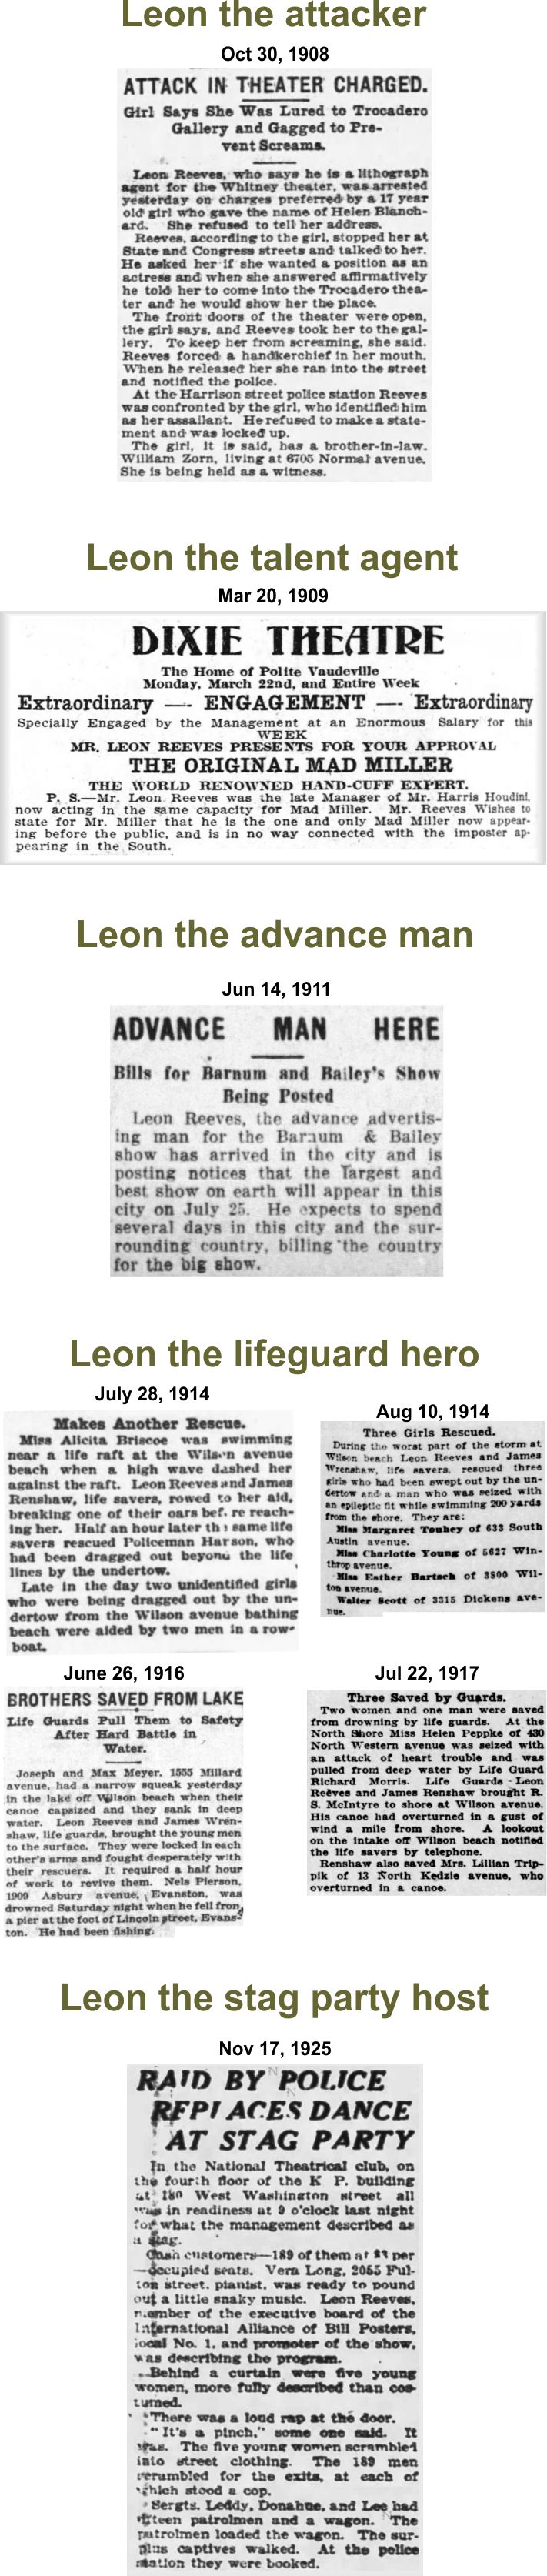 Leon Reeves, man of many stages